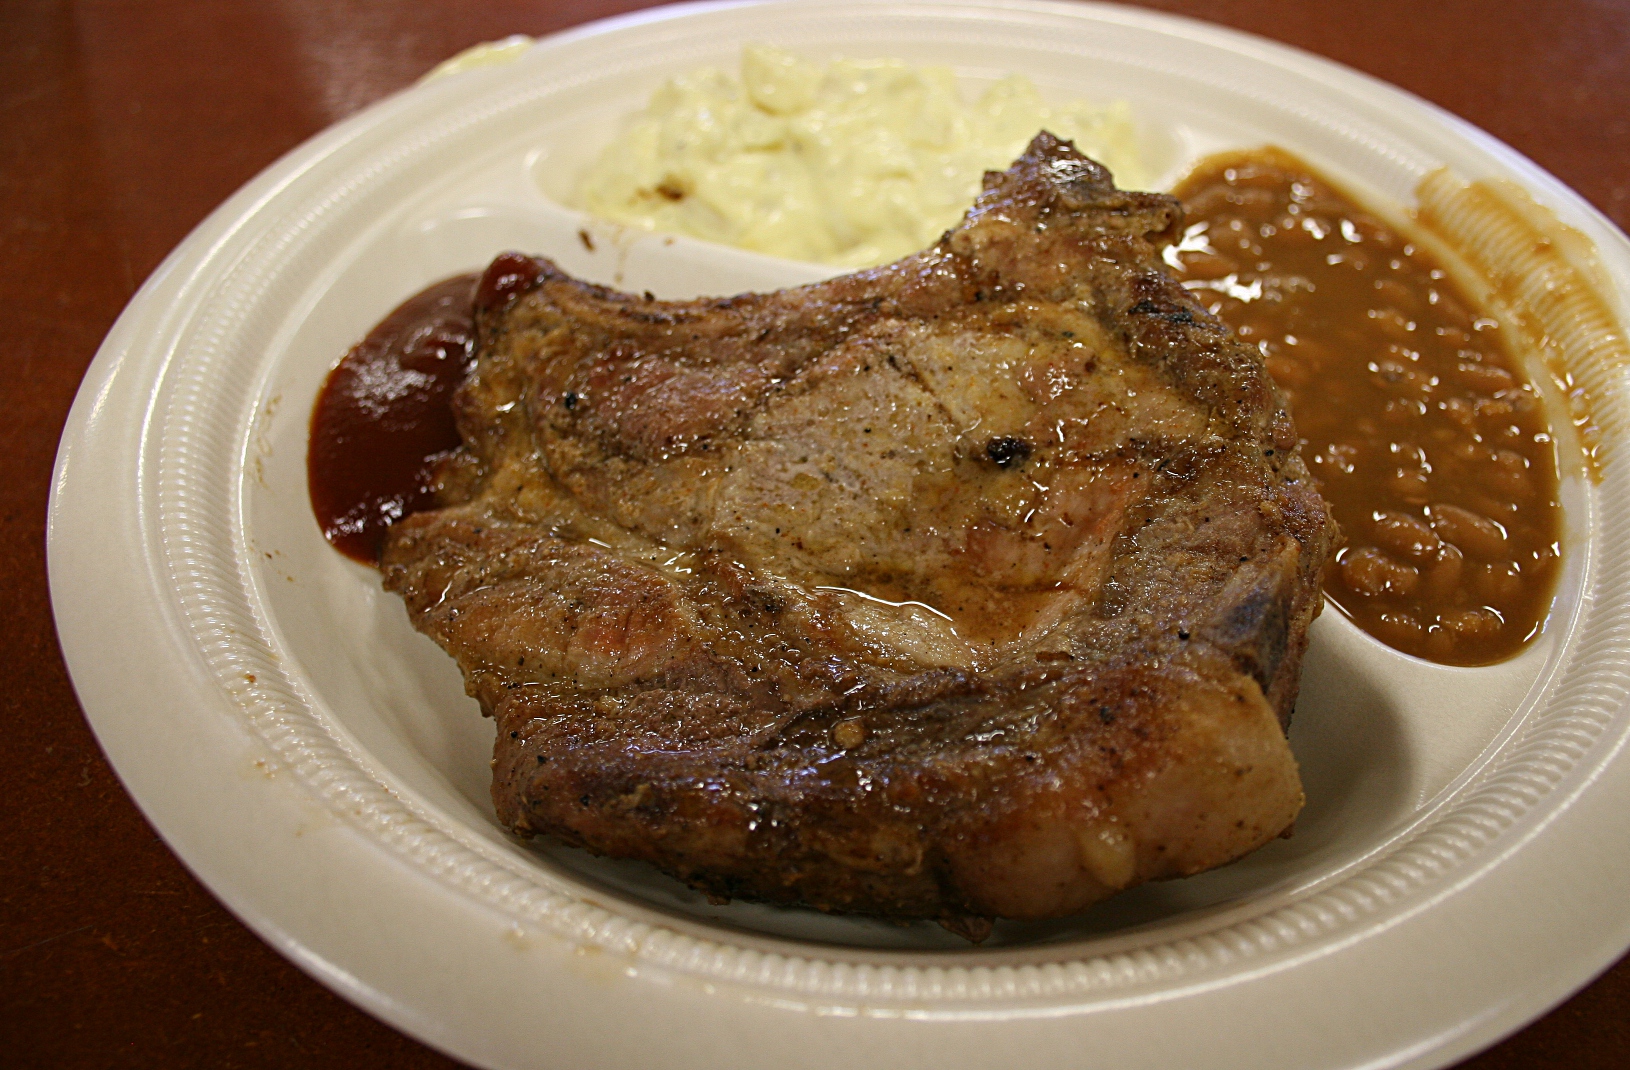 The grilled pork chop meal.